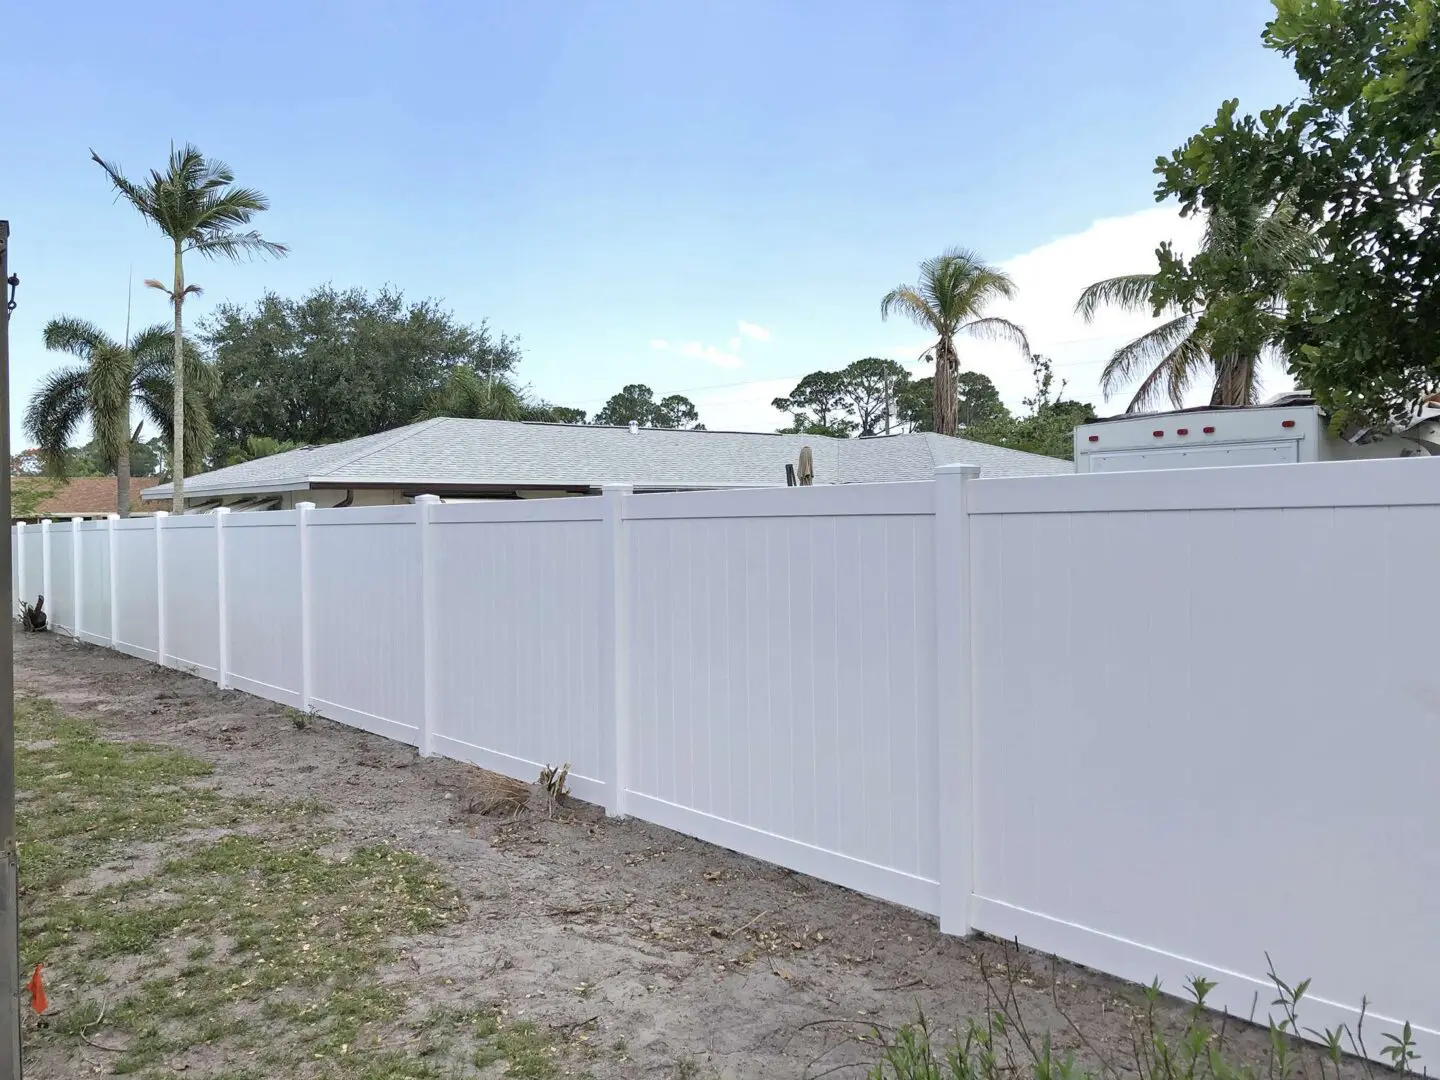 A white fence with palm trees in the background.